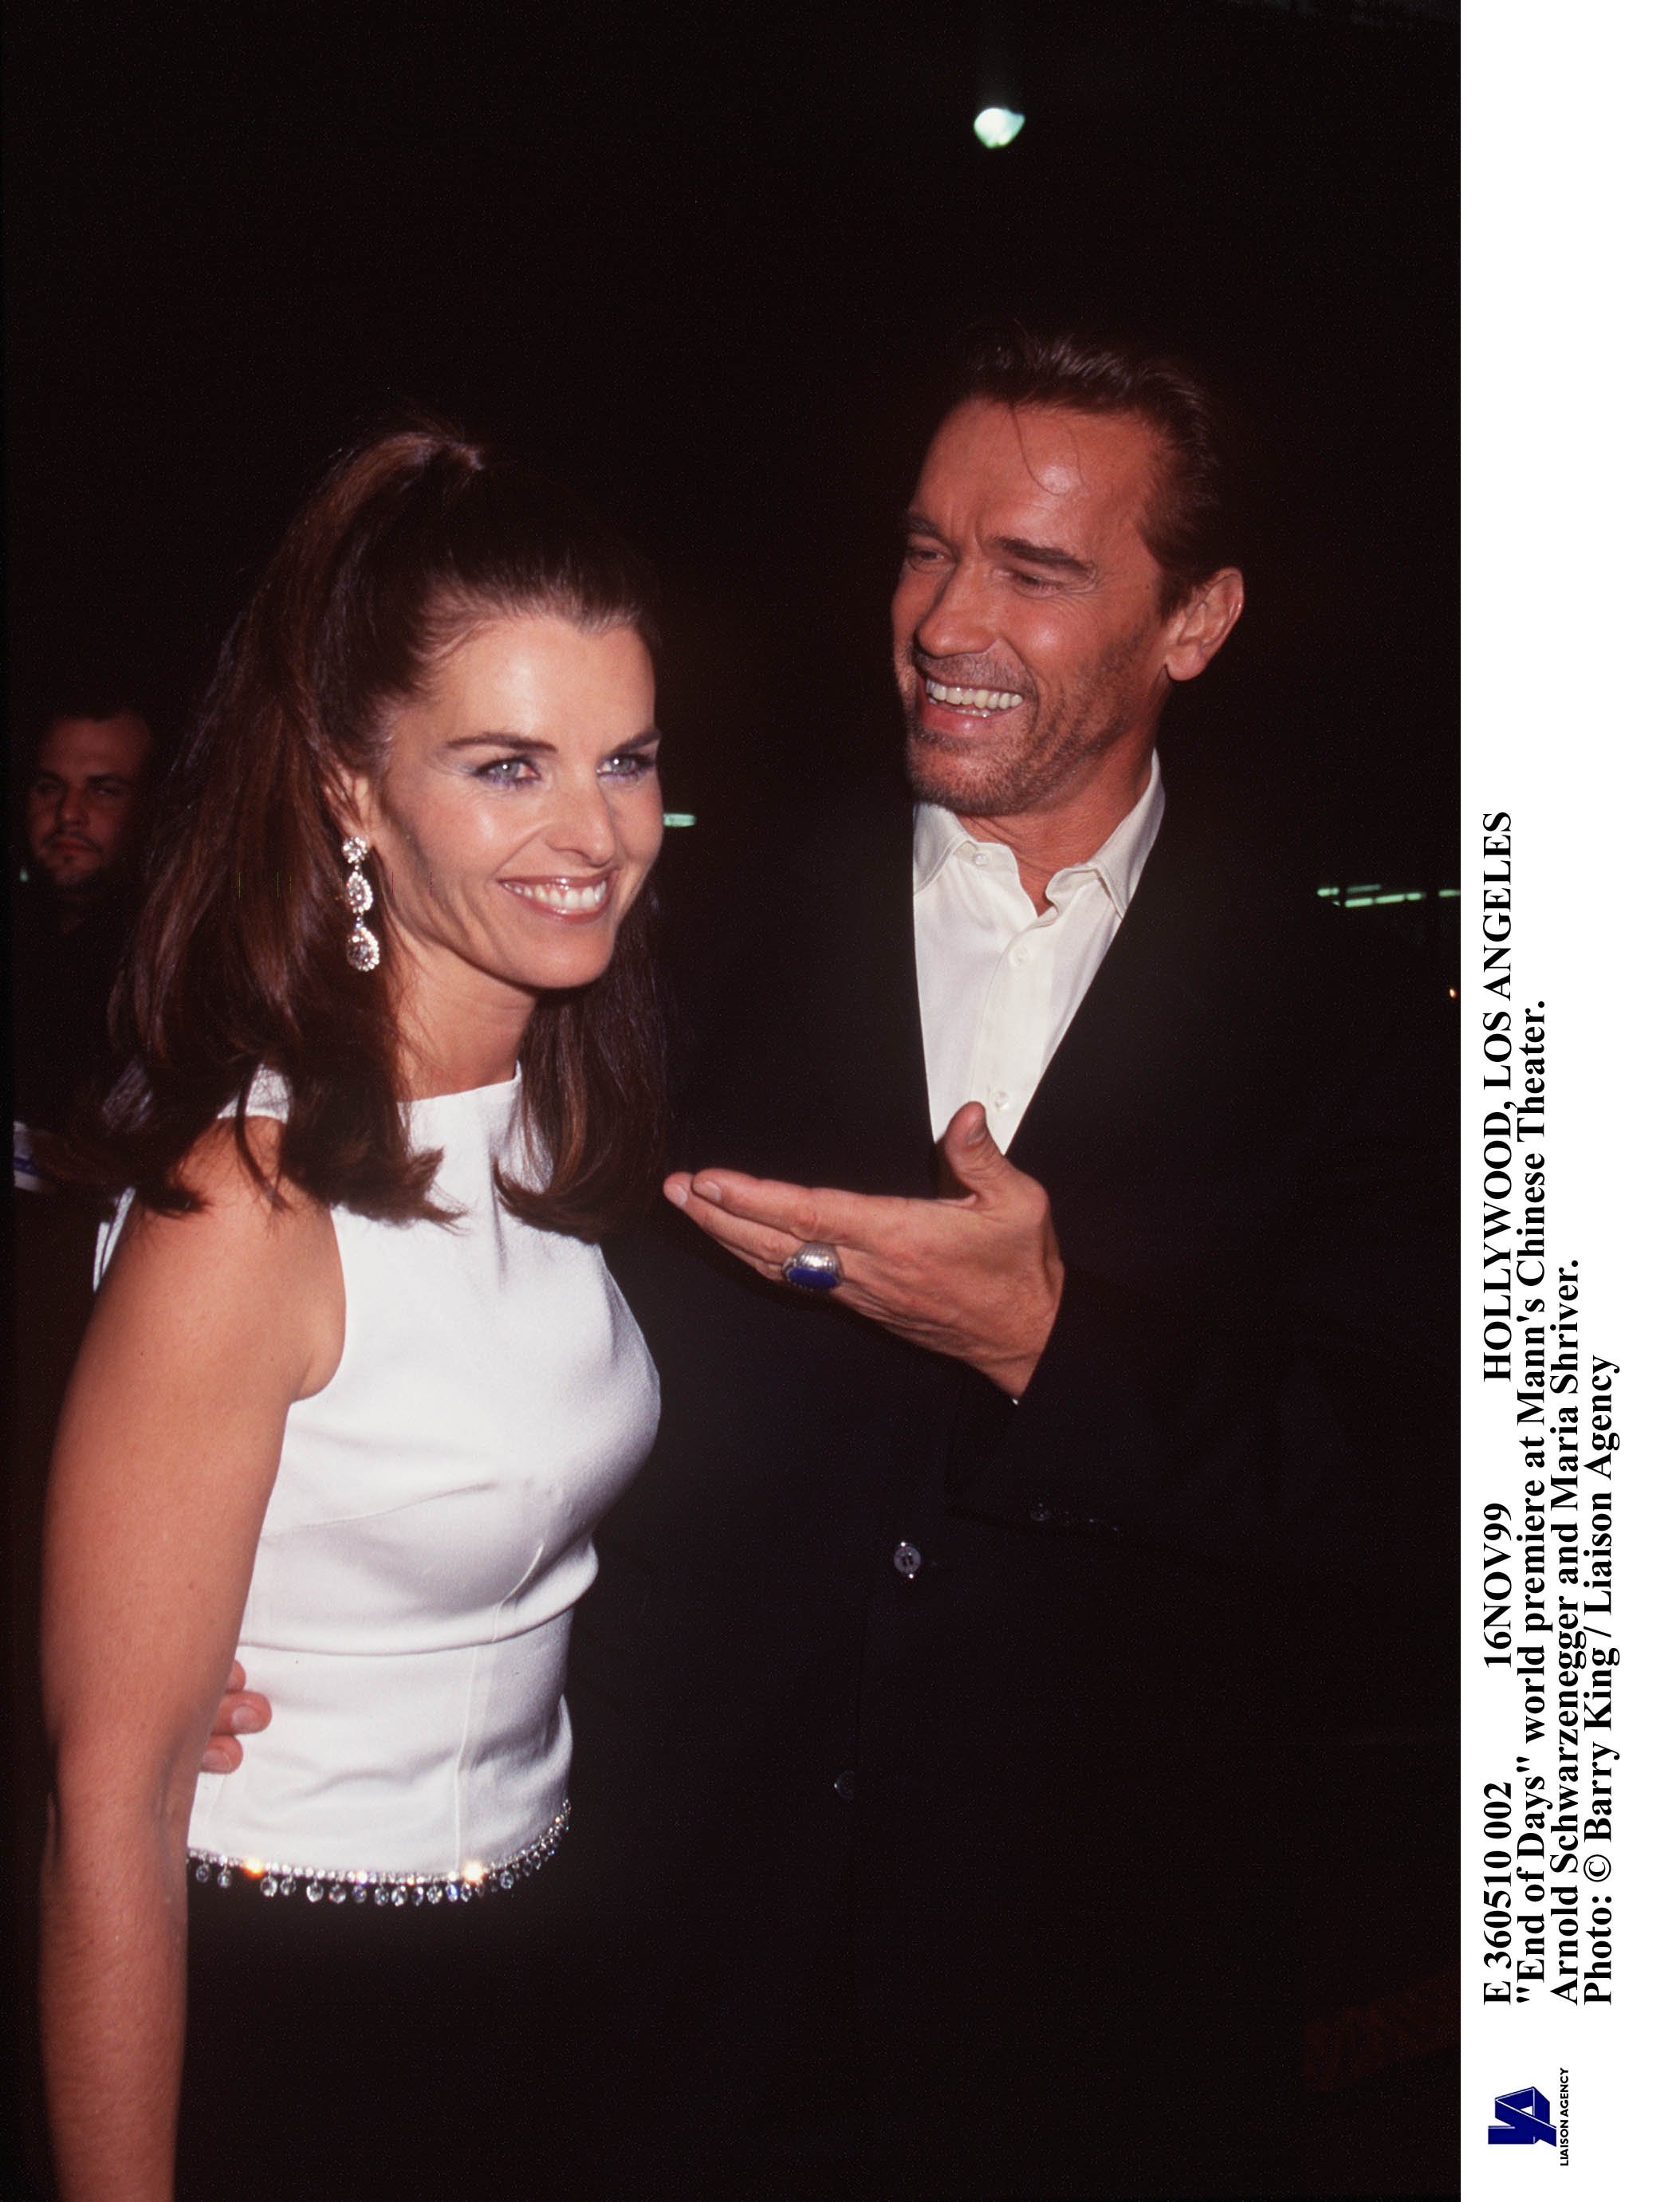 Maria Shriver and Arnold Schwarzenegger in Hollywood, Los Angeles, at the "End Of Days" world premiere | Source: Getty Images